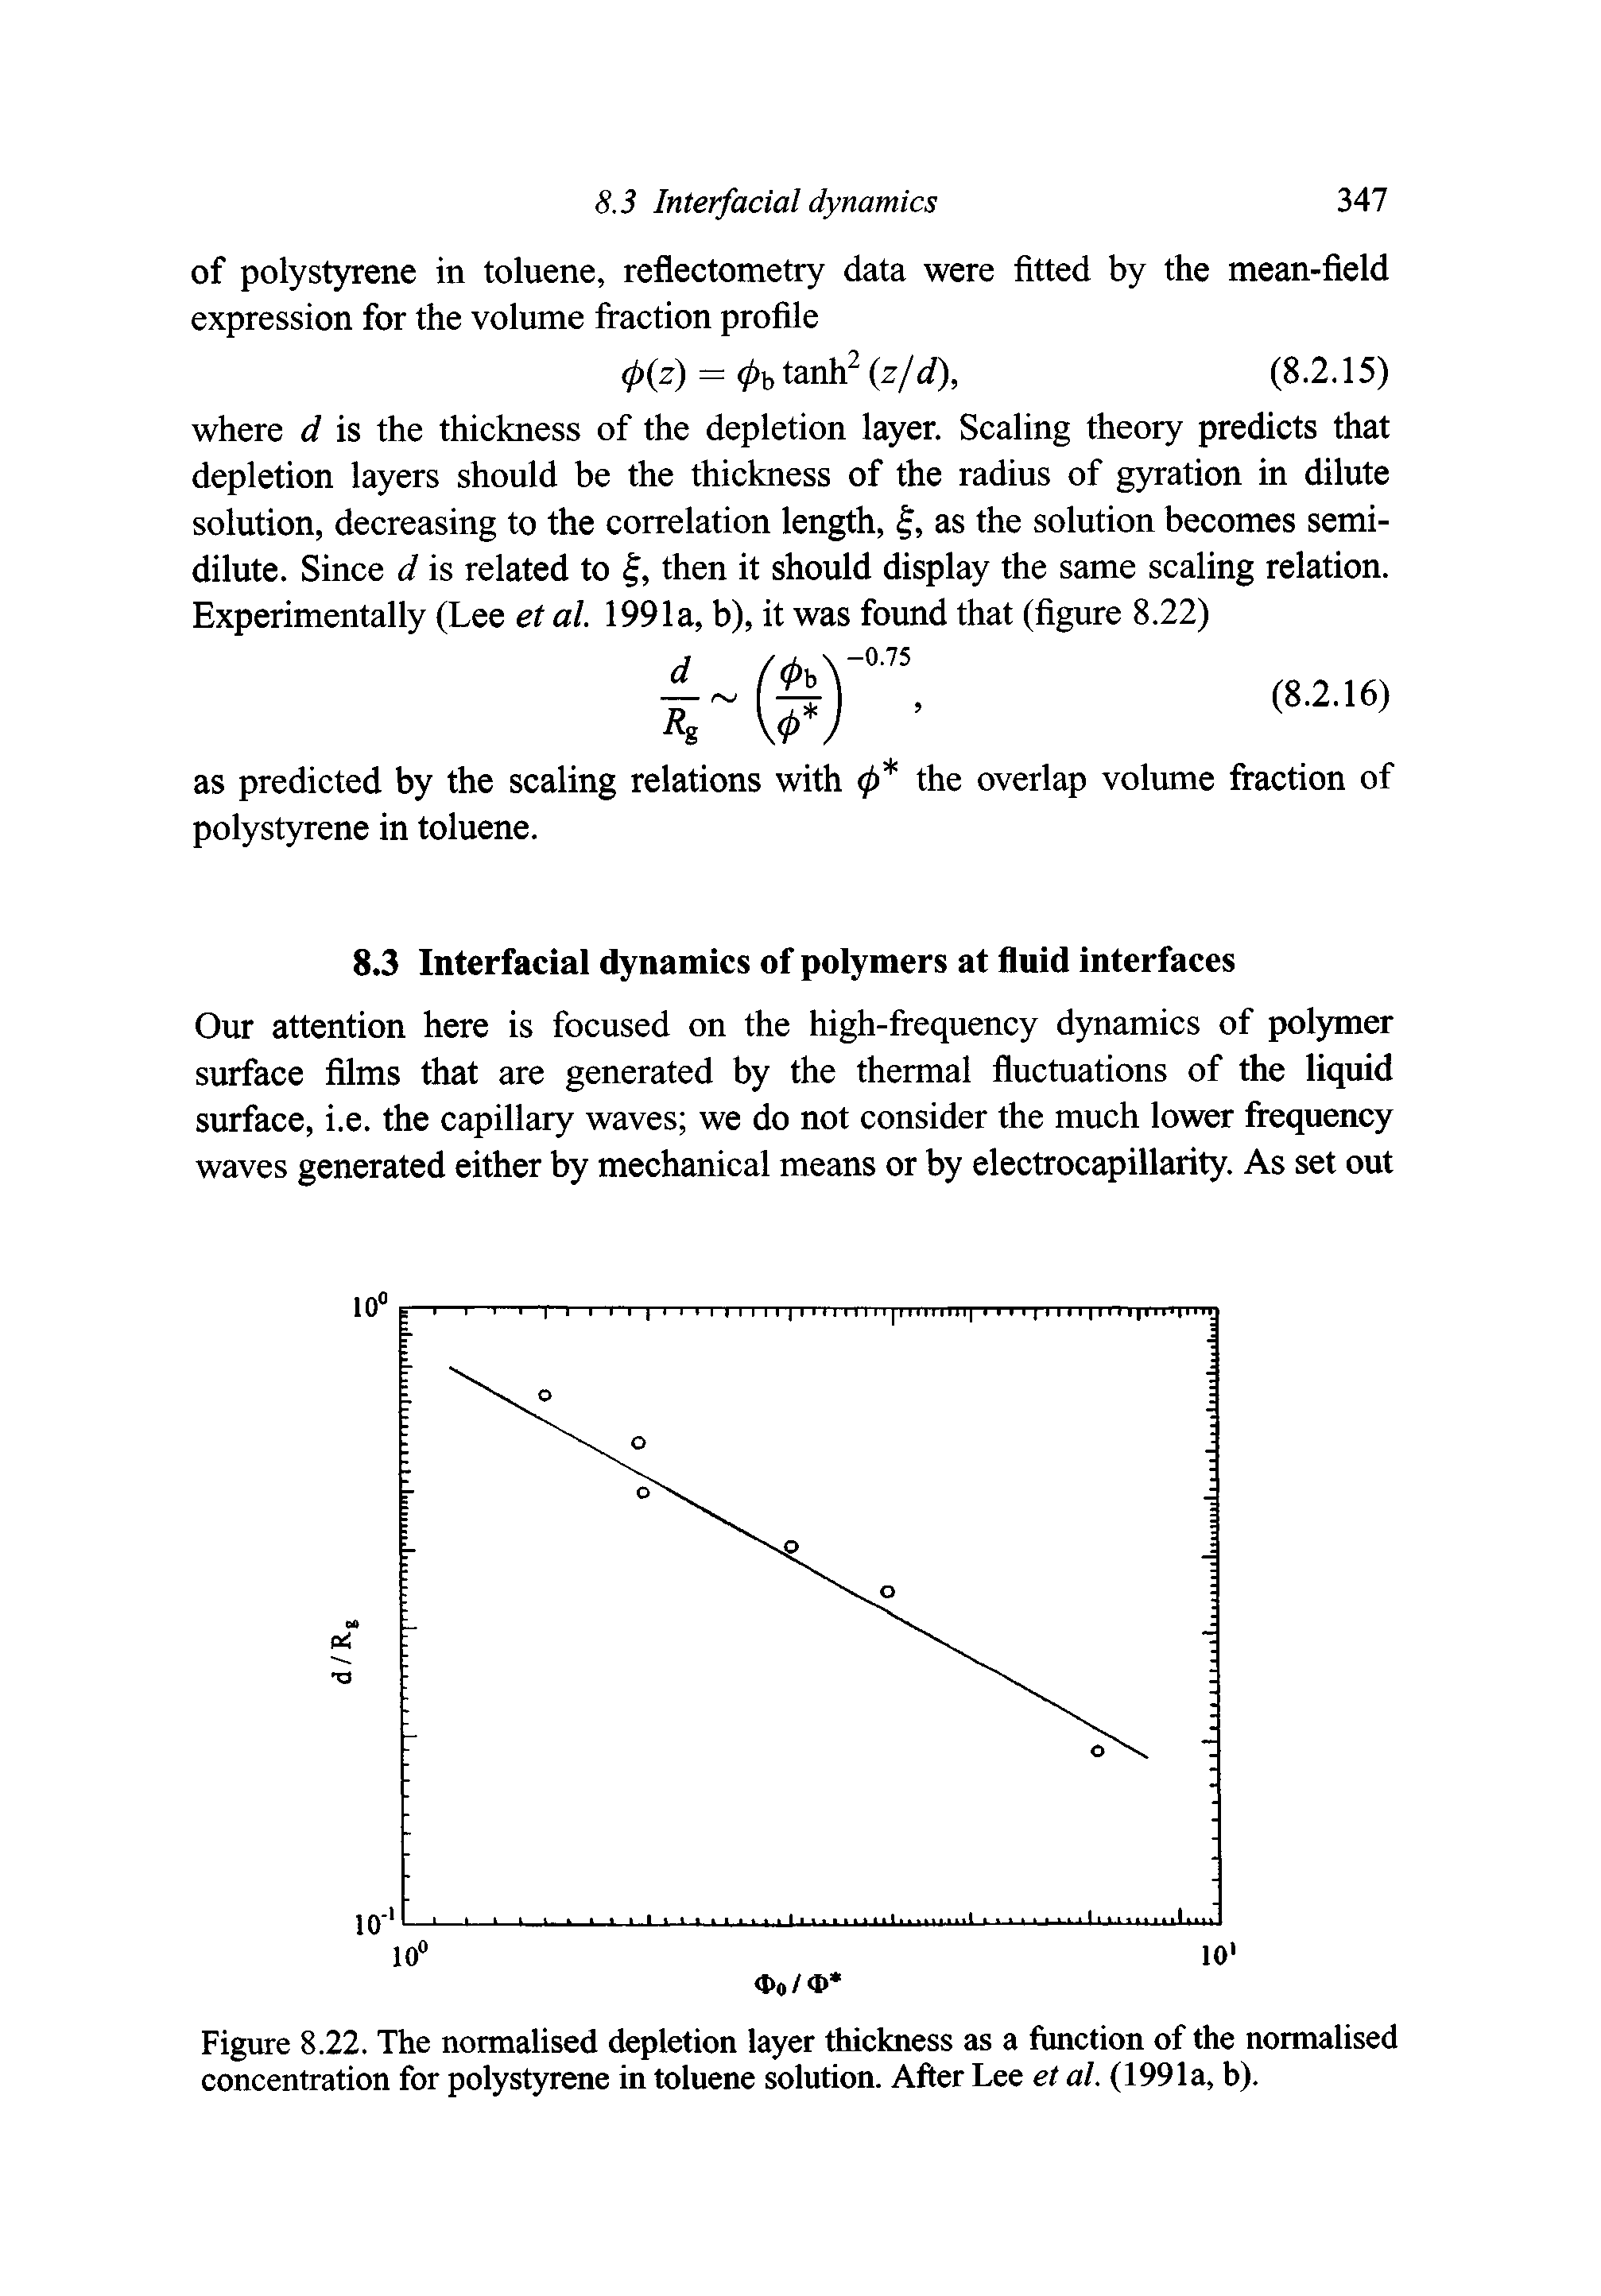 Figure 8.22. The normalised depletion layer thickness as a function of the normalised concentration for polystyrene in toluene solution. After Lee et al. (1991a, b).